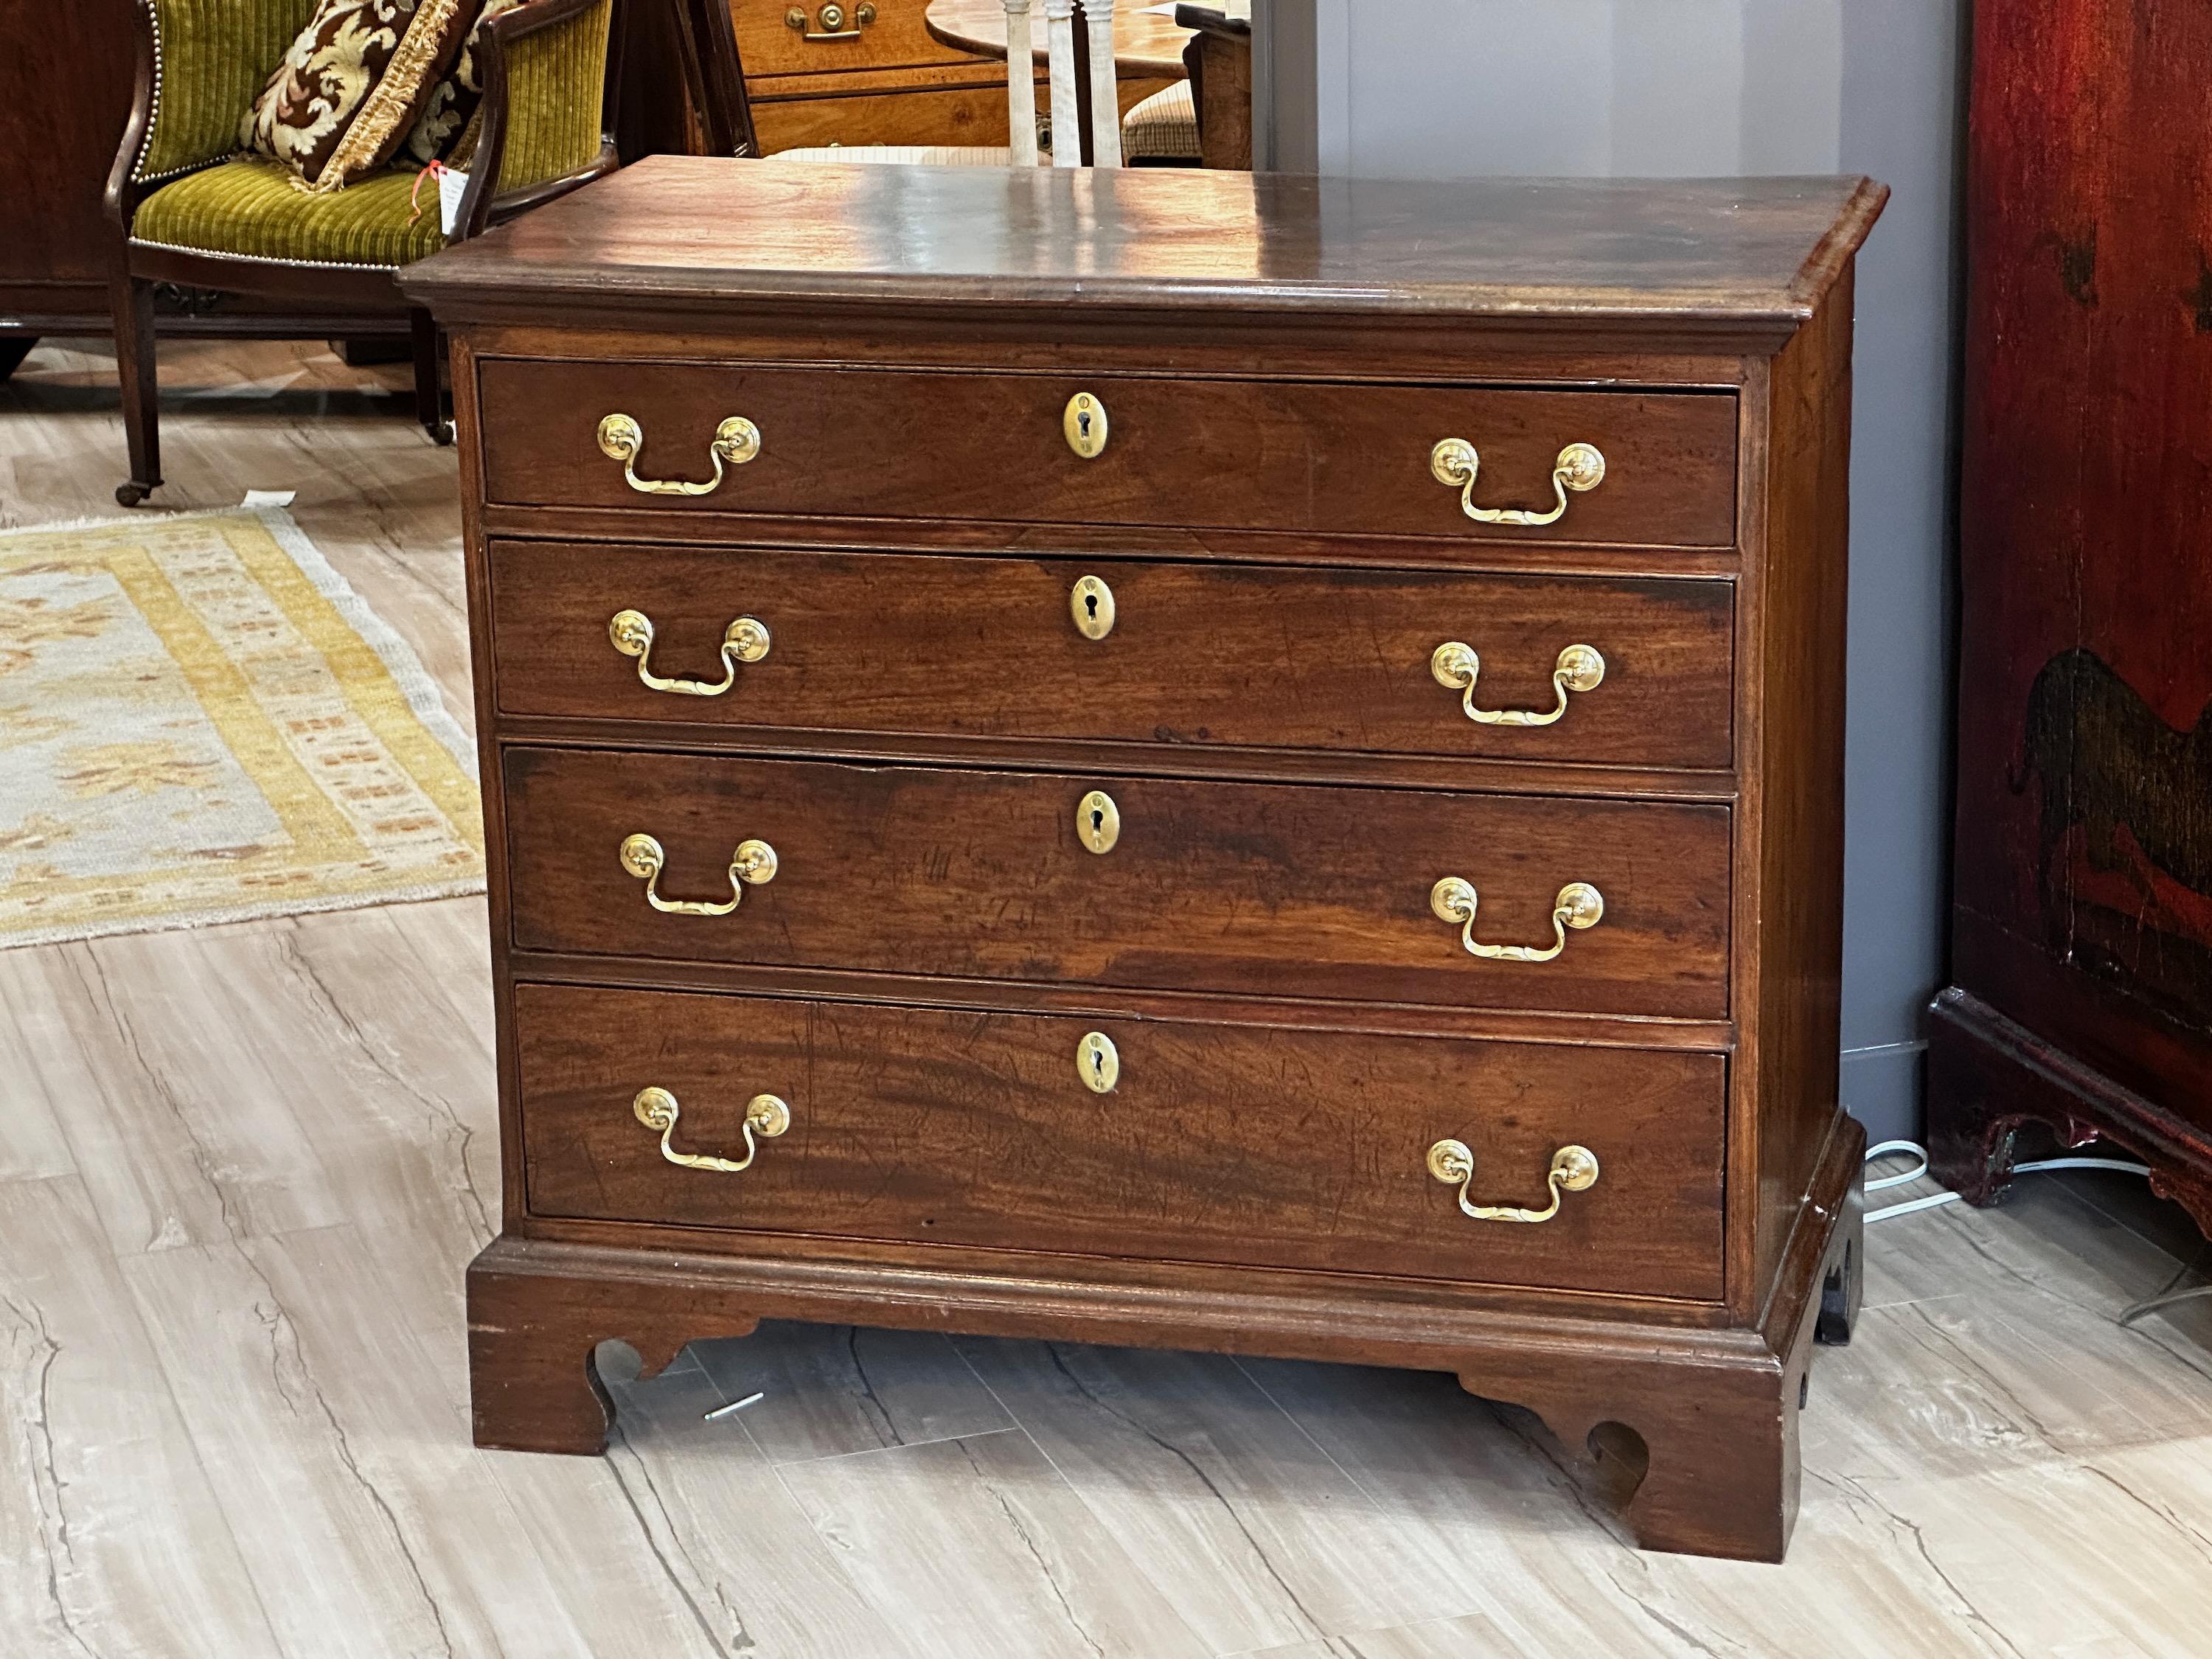 A late 18th century small scale Georgian chest of drawers having four graduated drawers with original brass bail raised on shaped bracket feet. Mahogany is the primary wood with oak and pine as the secondary woods. No keys.